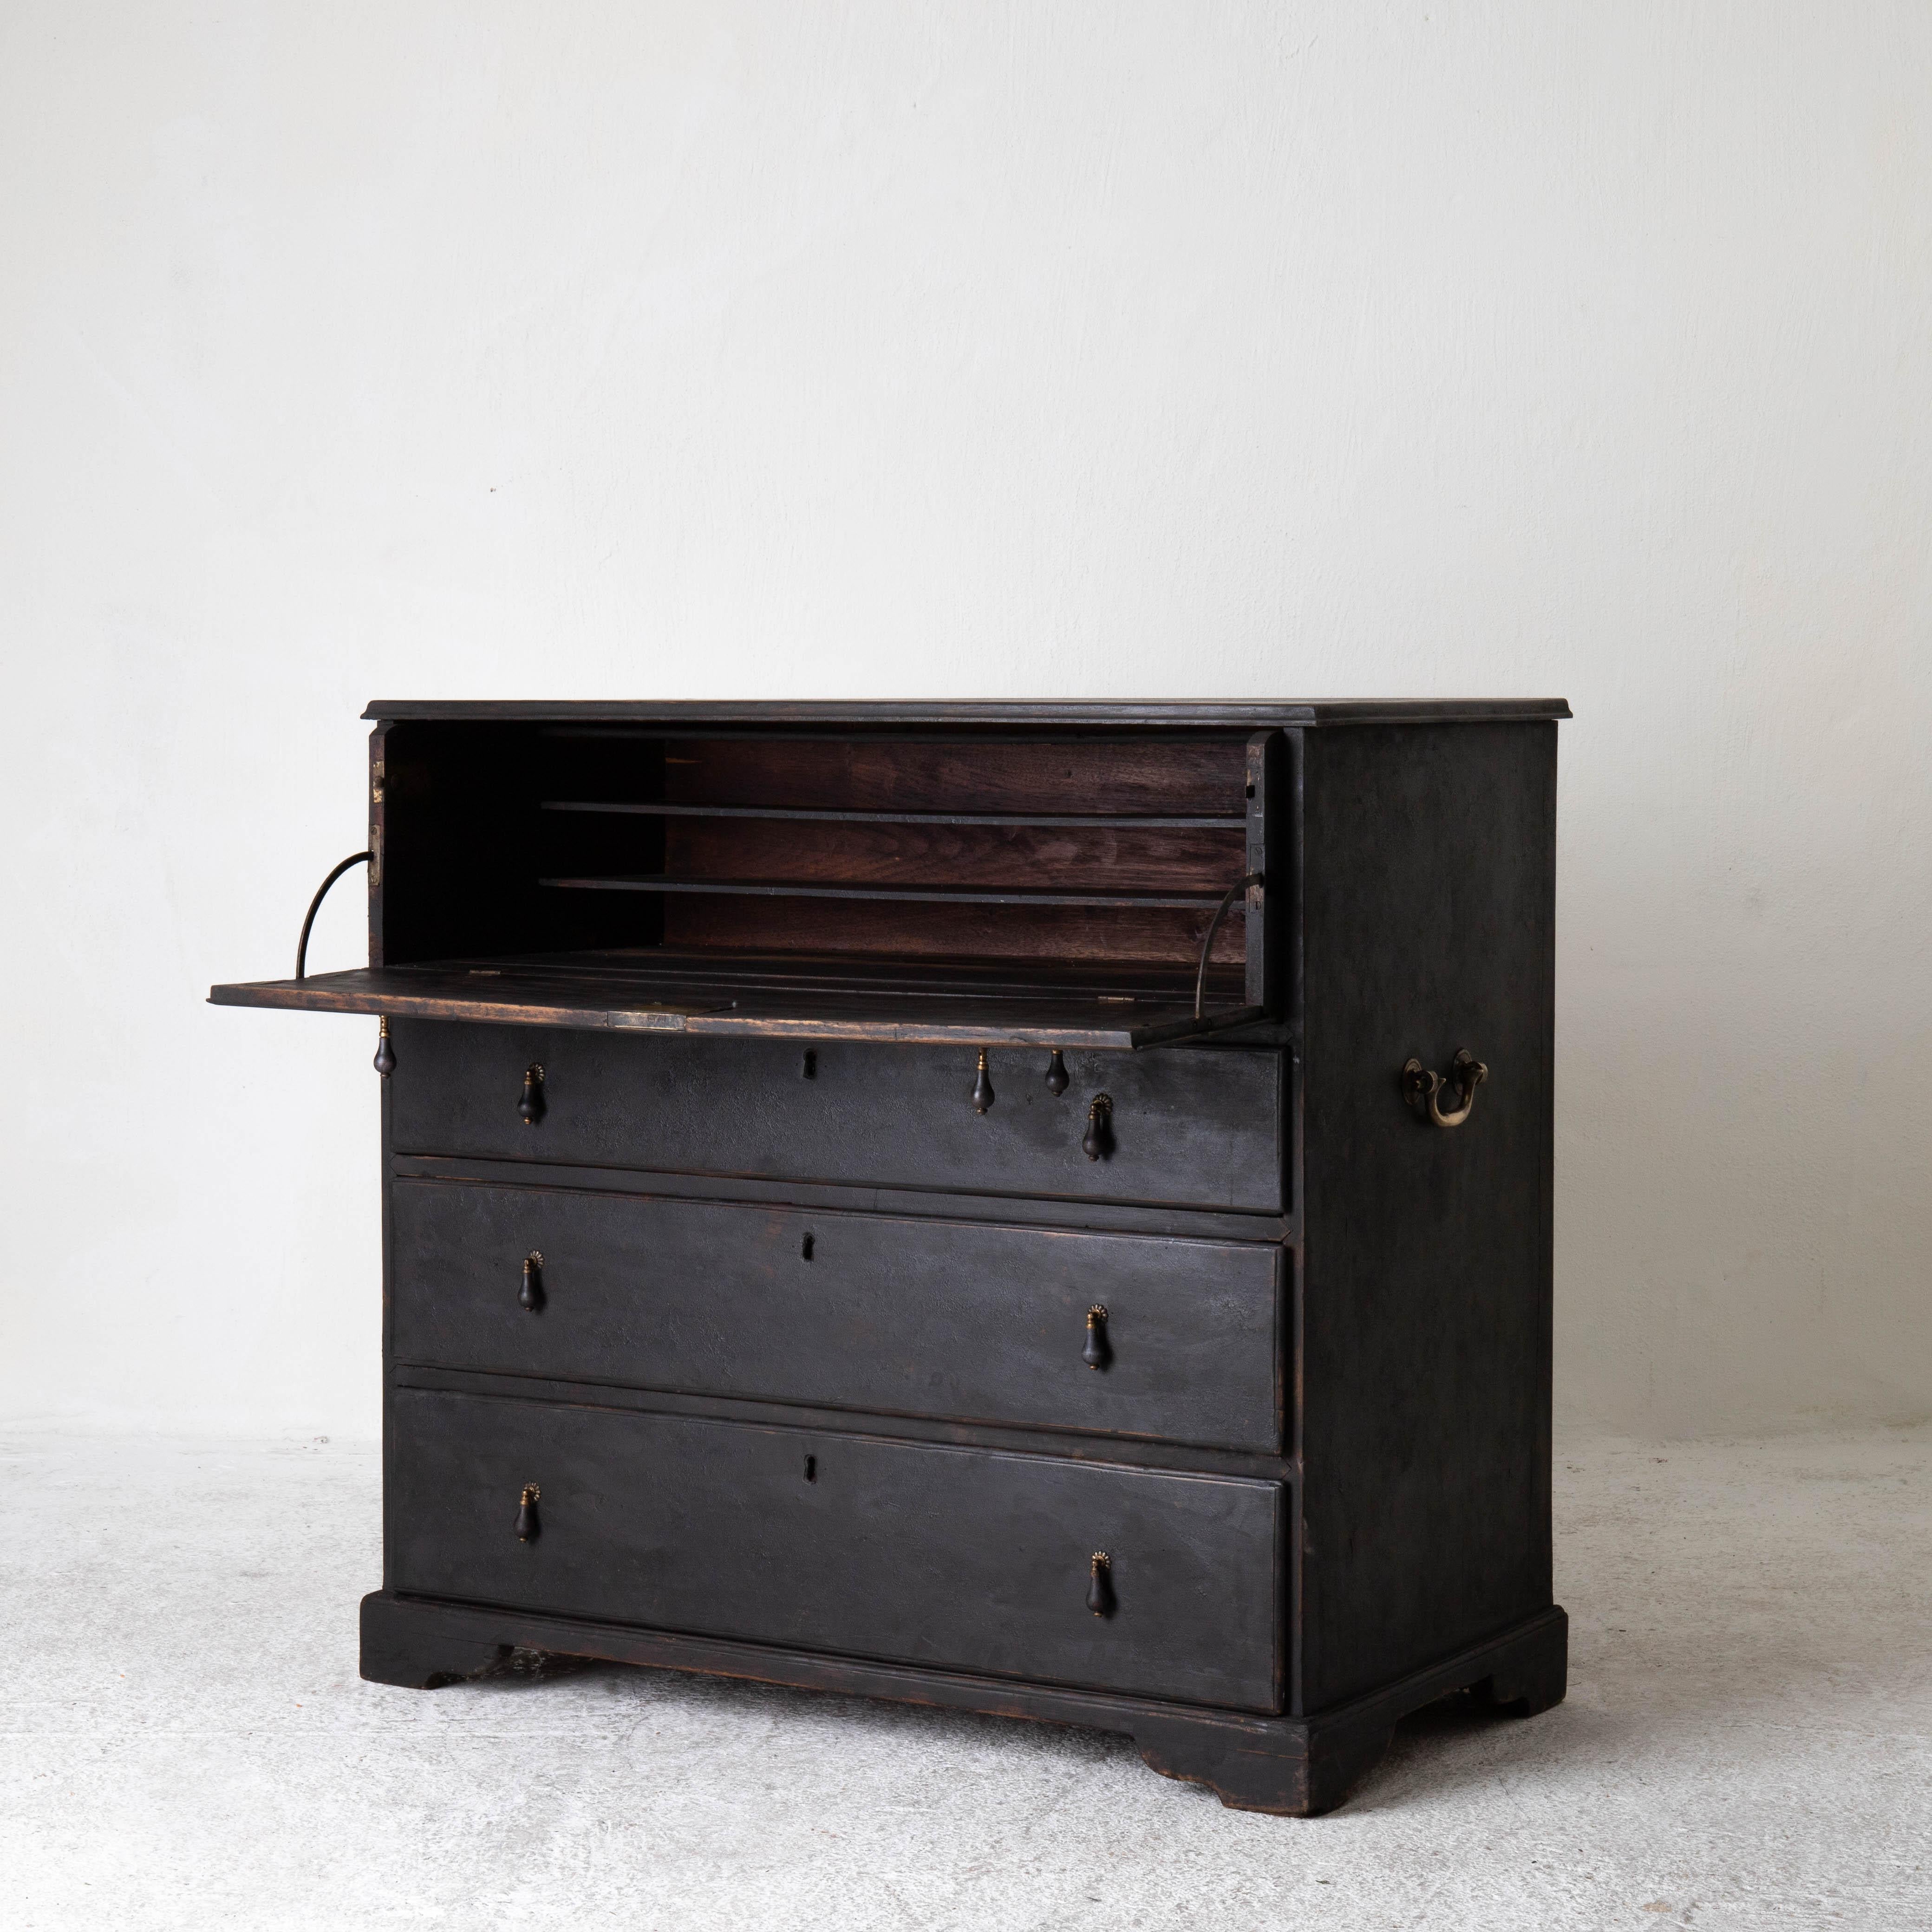 Chest of drawers writing desk top black English 18th century England. A chest of drawers with the two top drawers opening up to be a writing desk. Refinished in black matt finish. Contemporary hardware in black wood and brass. Total of 5 drawers. 3